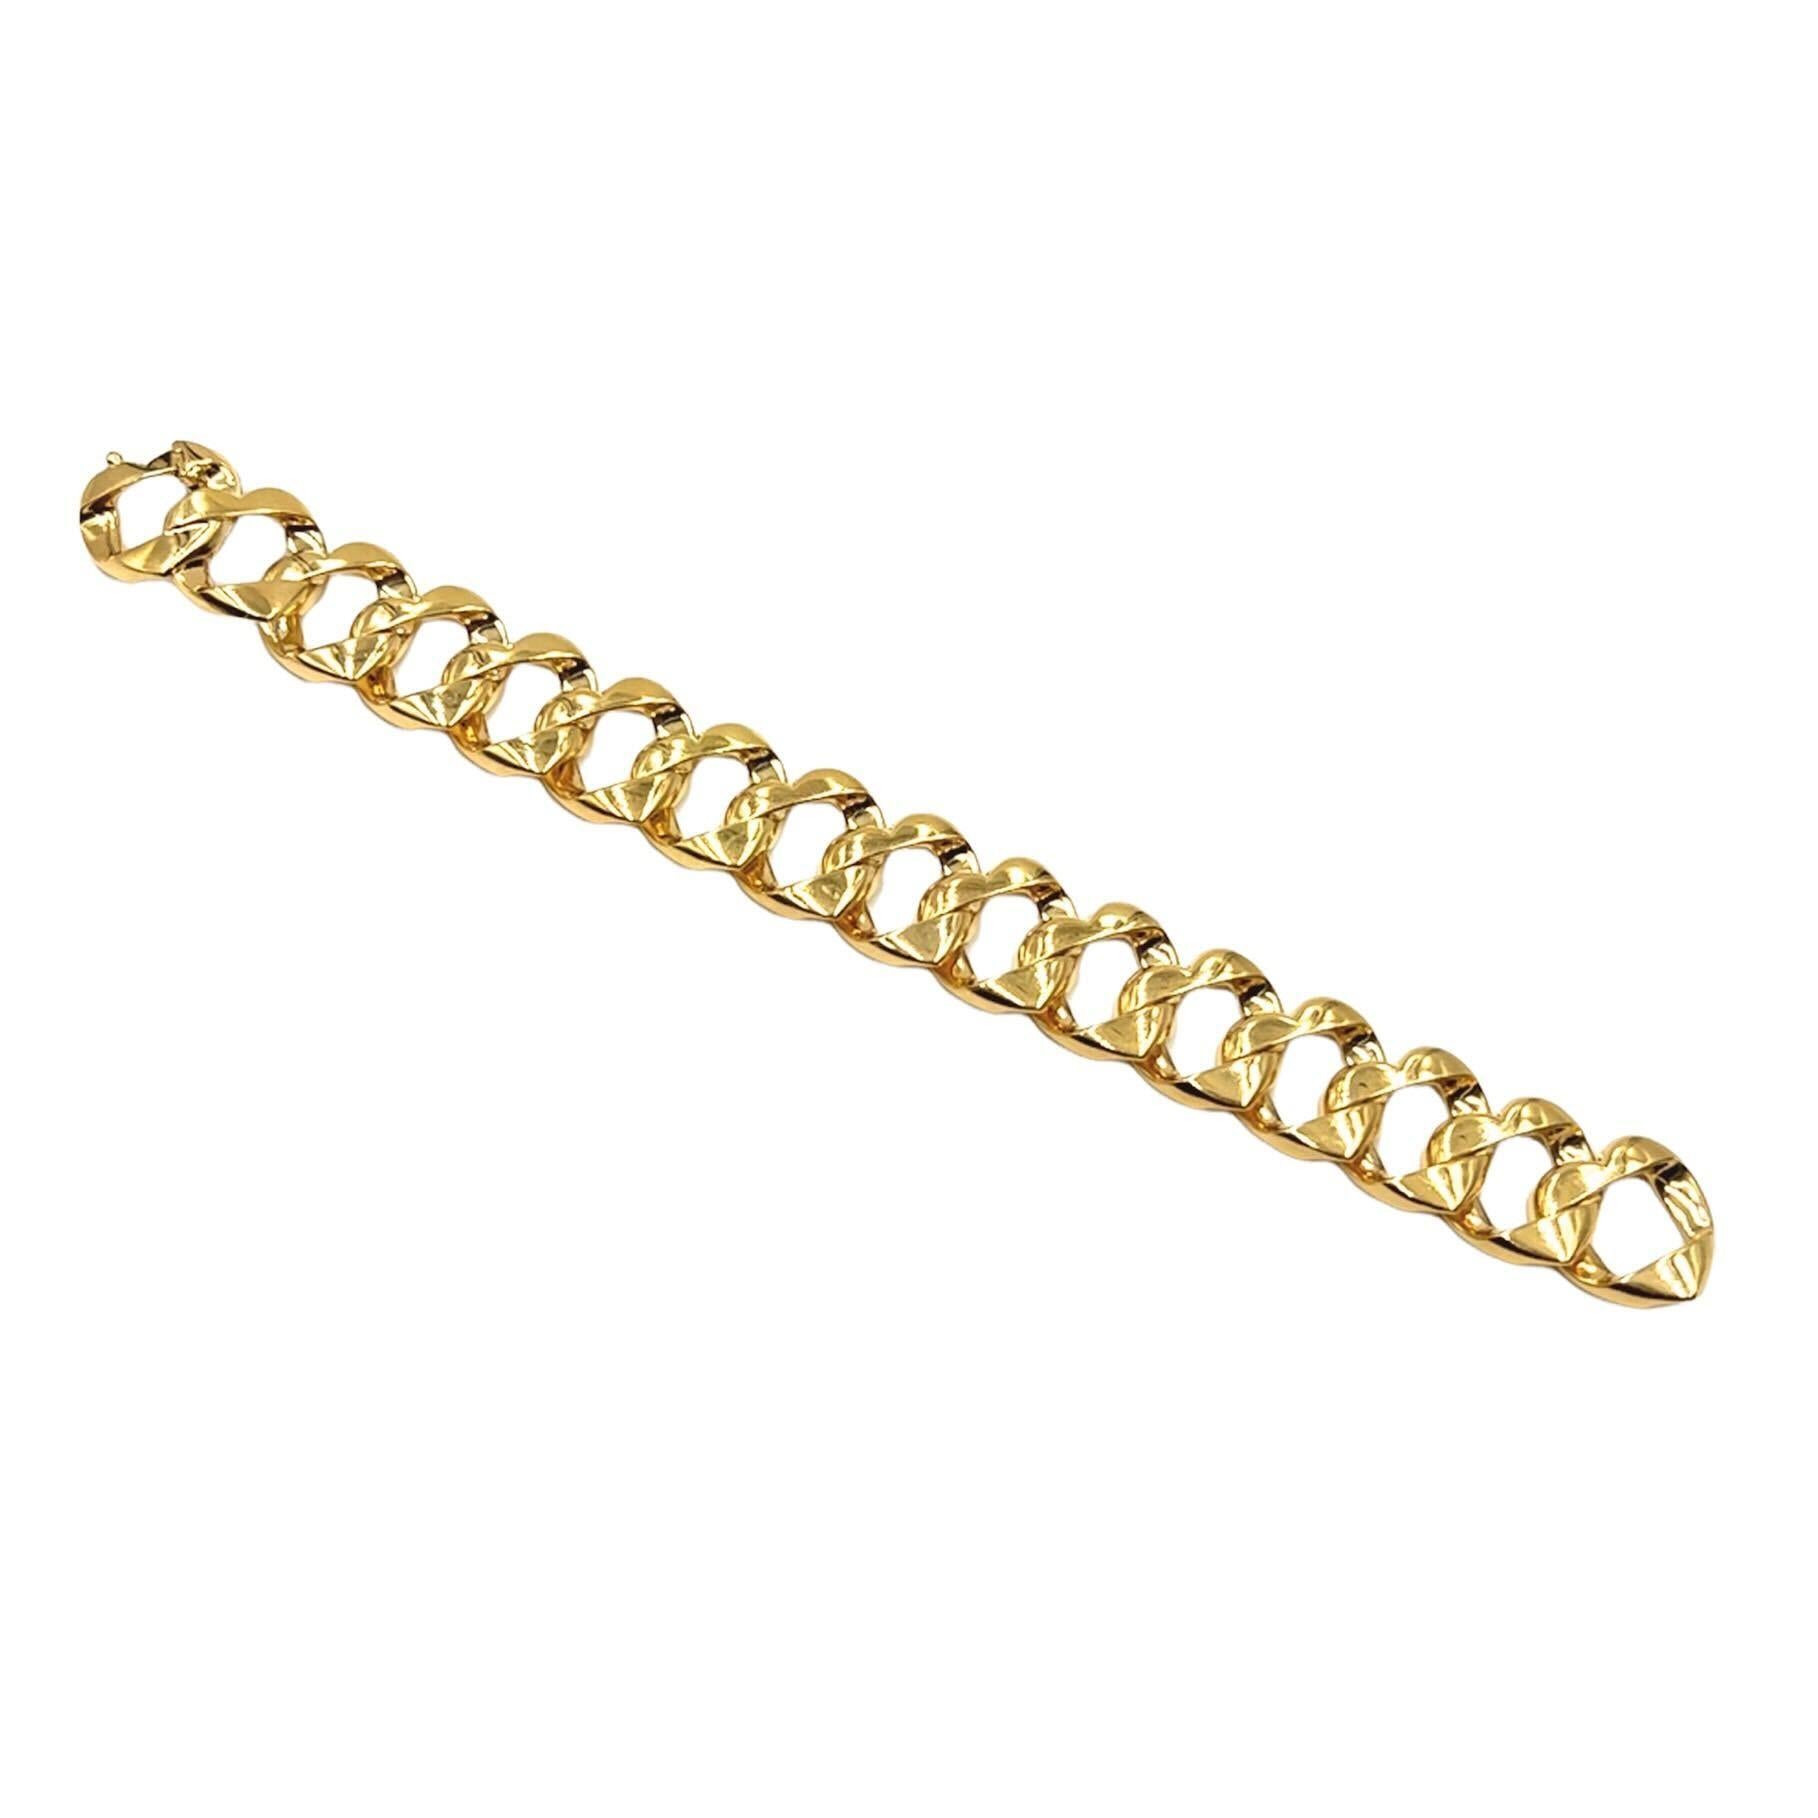 An 18 karat yellow gold bracelet, Tiffany & Co.  The bracelet formed as a length of heart shaped curb links.  Lenght approximately 9 1/4 inches.  Gross weight approximately 115.10 grams.  Signed Tiffany & Co.